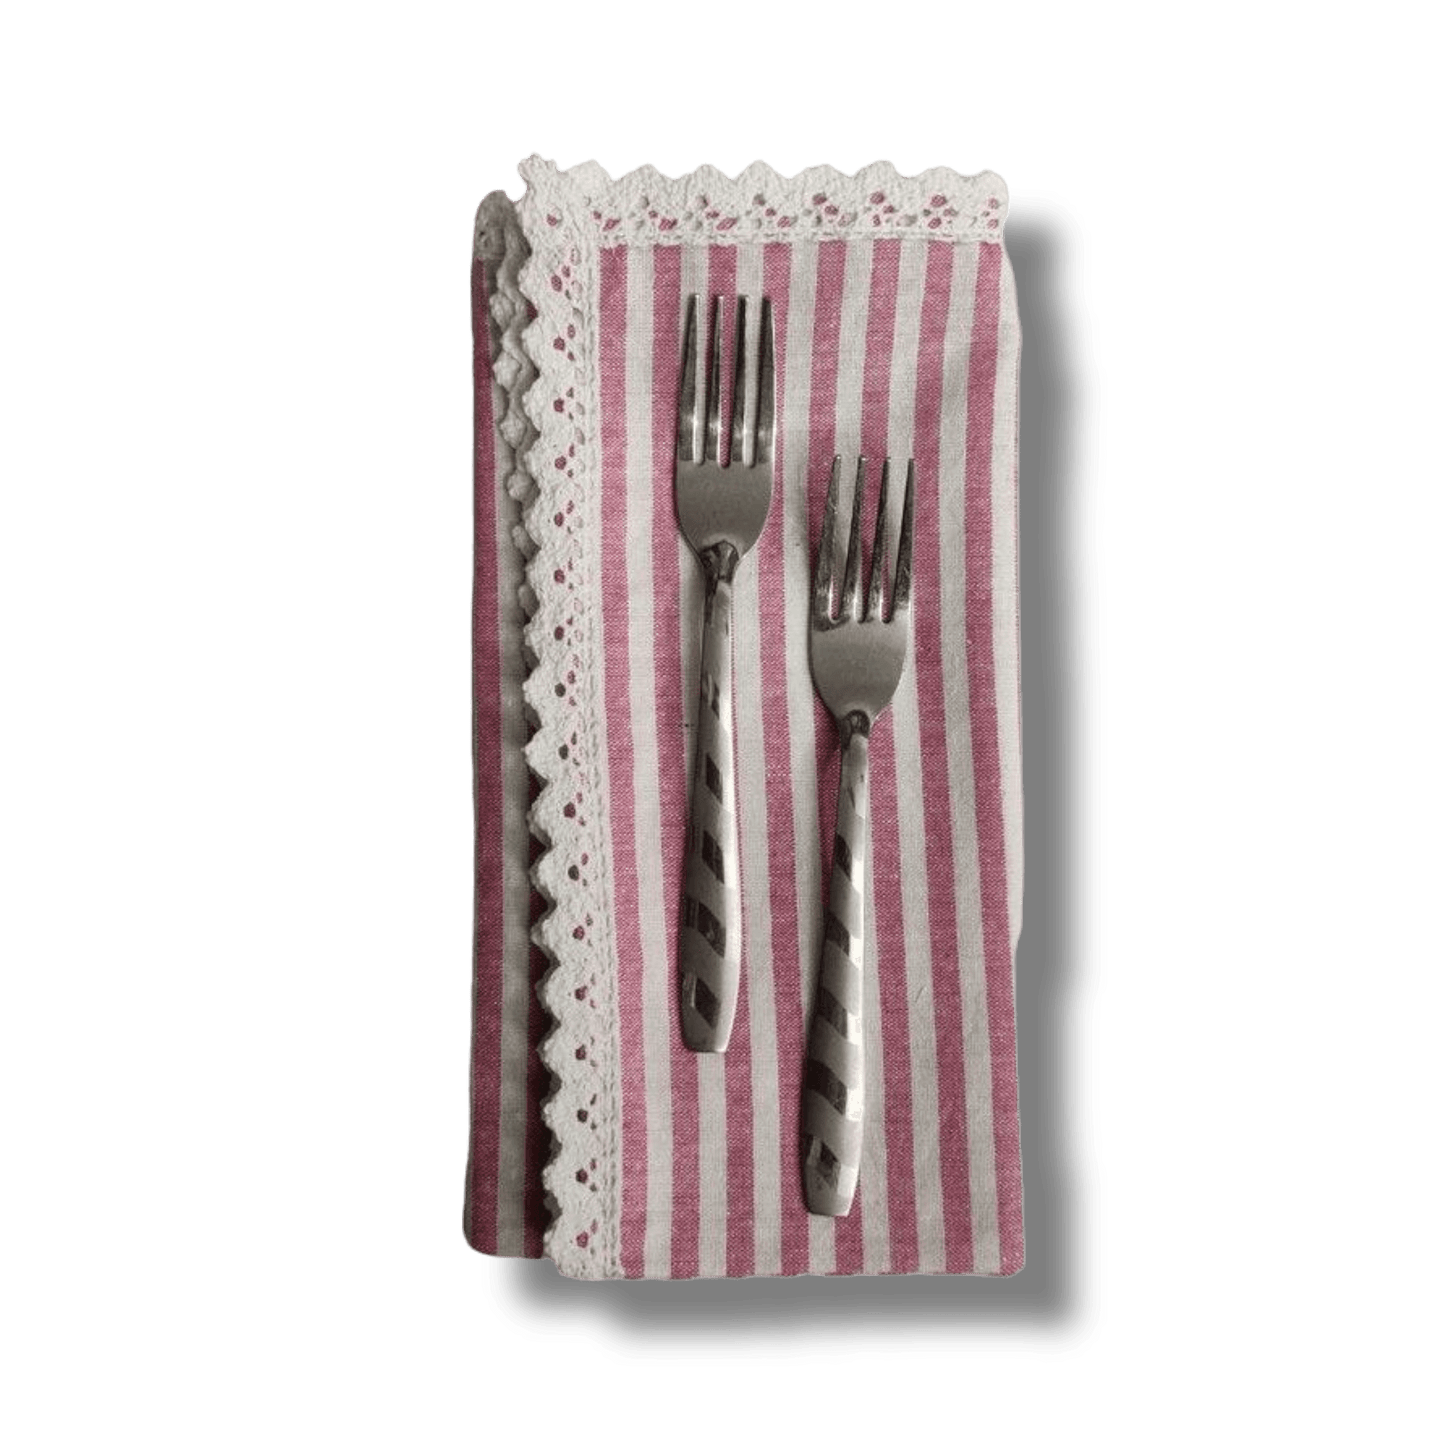 Striped Linen Napkins with White Lace - MAIA HOMES